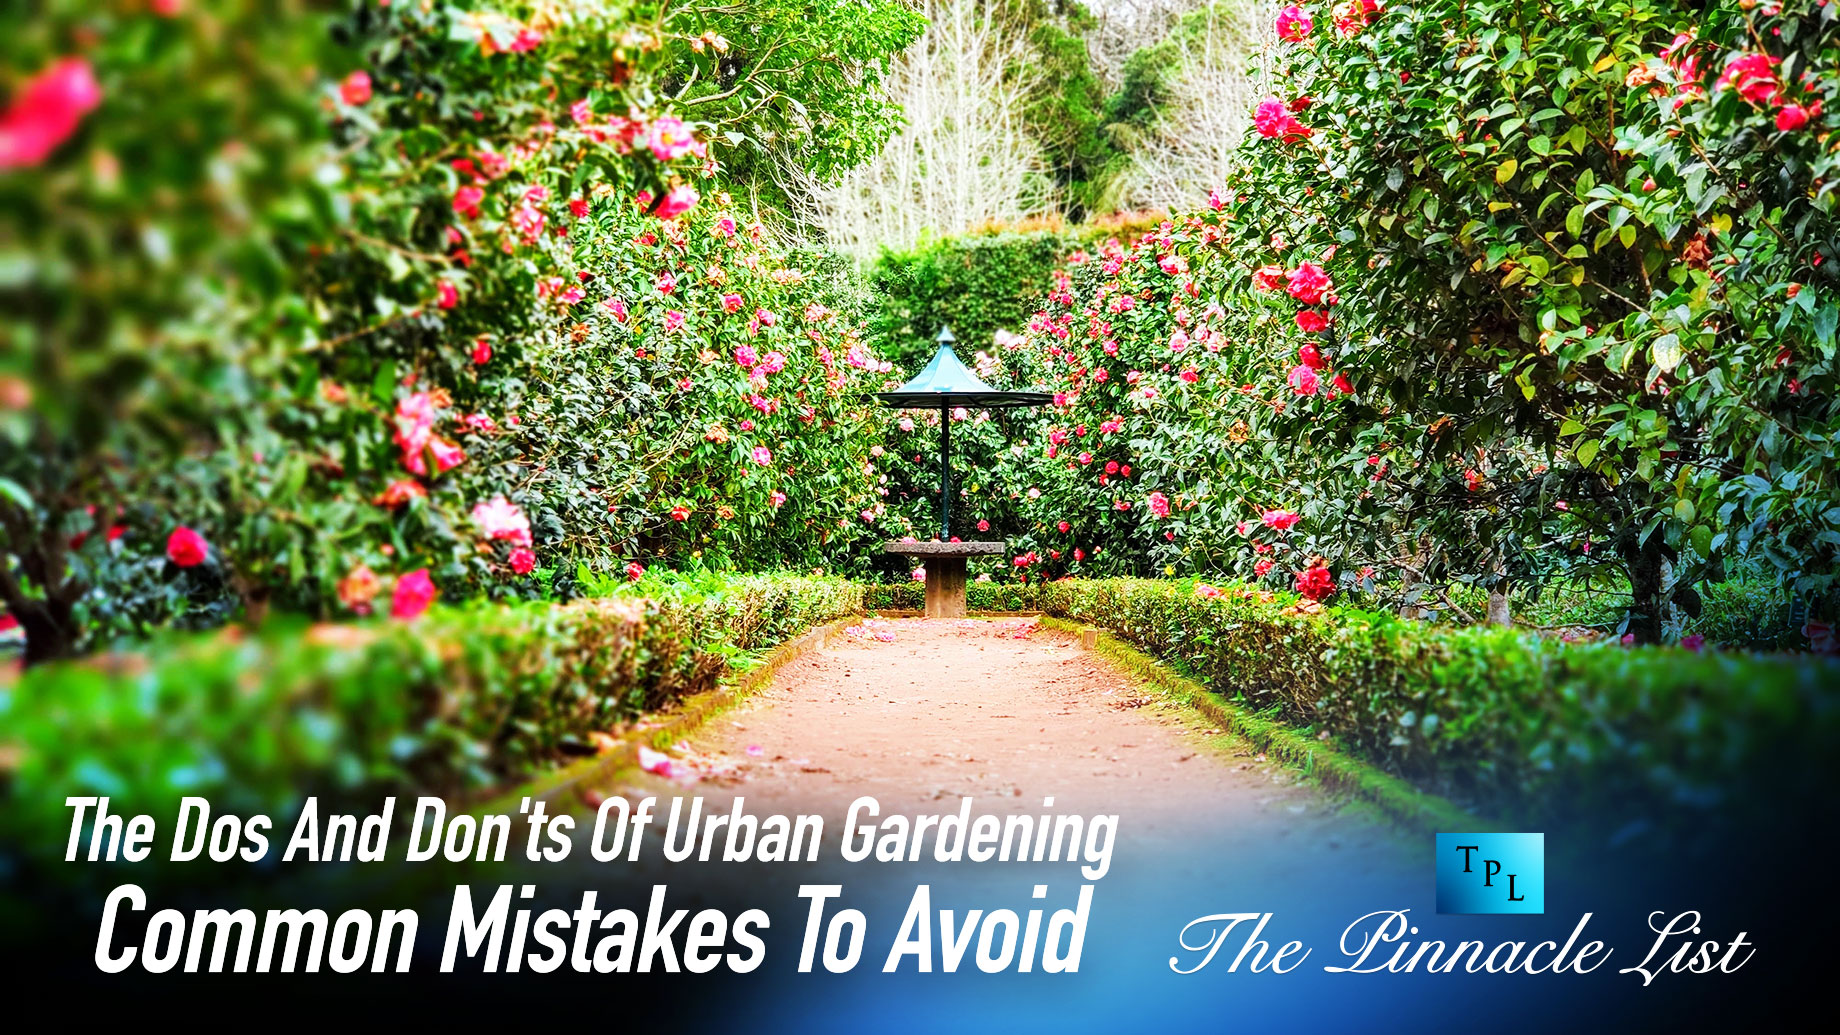 The Dos And Don'ts Of Urban Gardening: Common Mistakes To Avoid